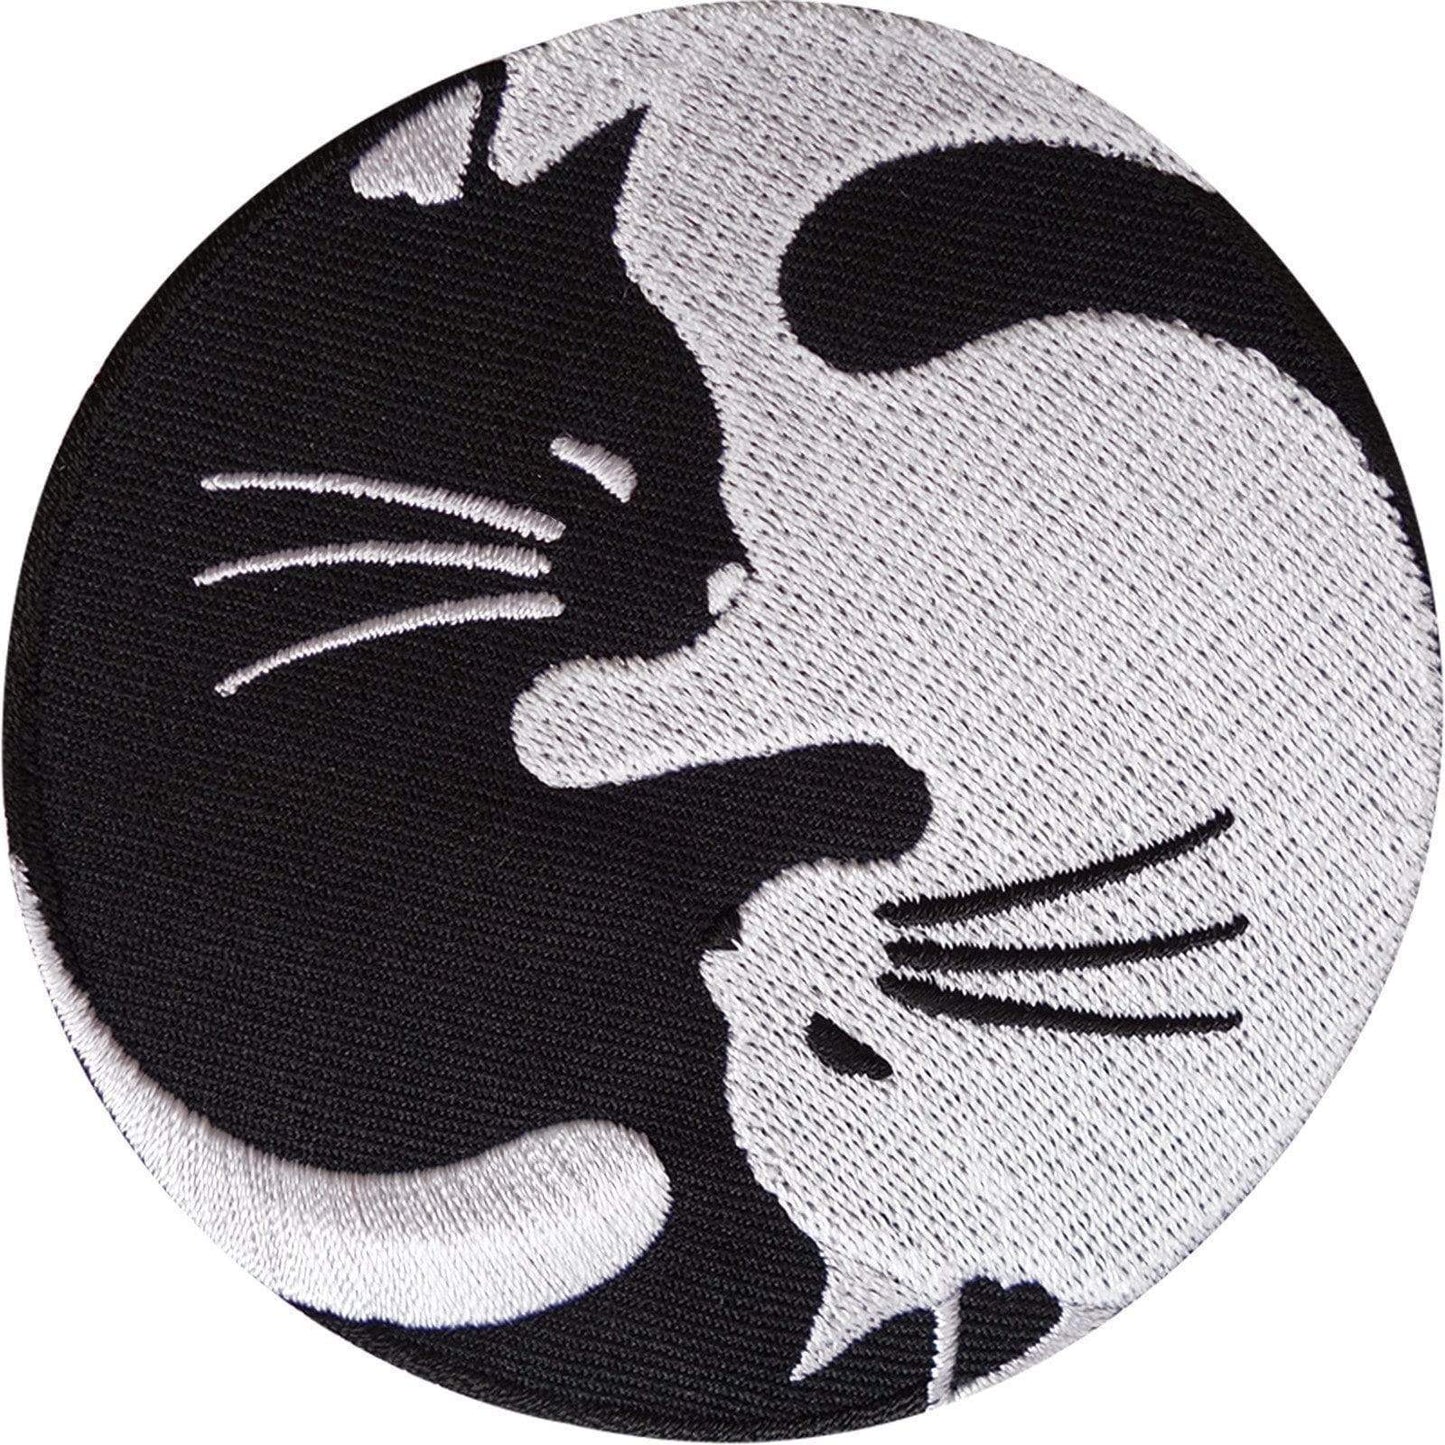 Yin and Yang Cat Patch Embroidered Badge Embroidery Applique Iron Sew On Clothes